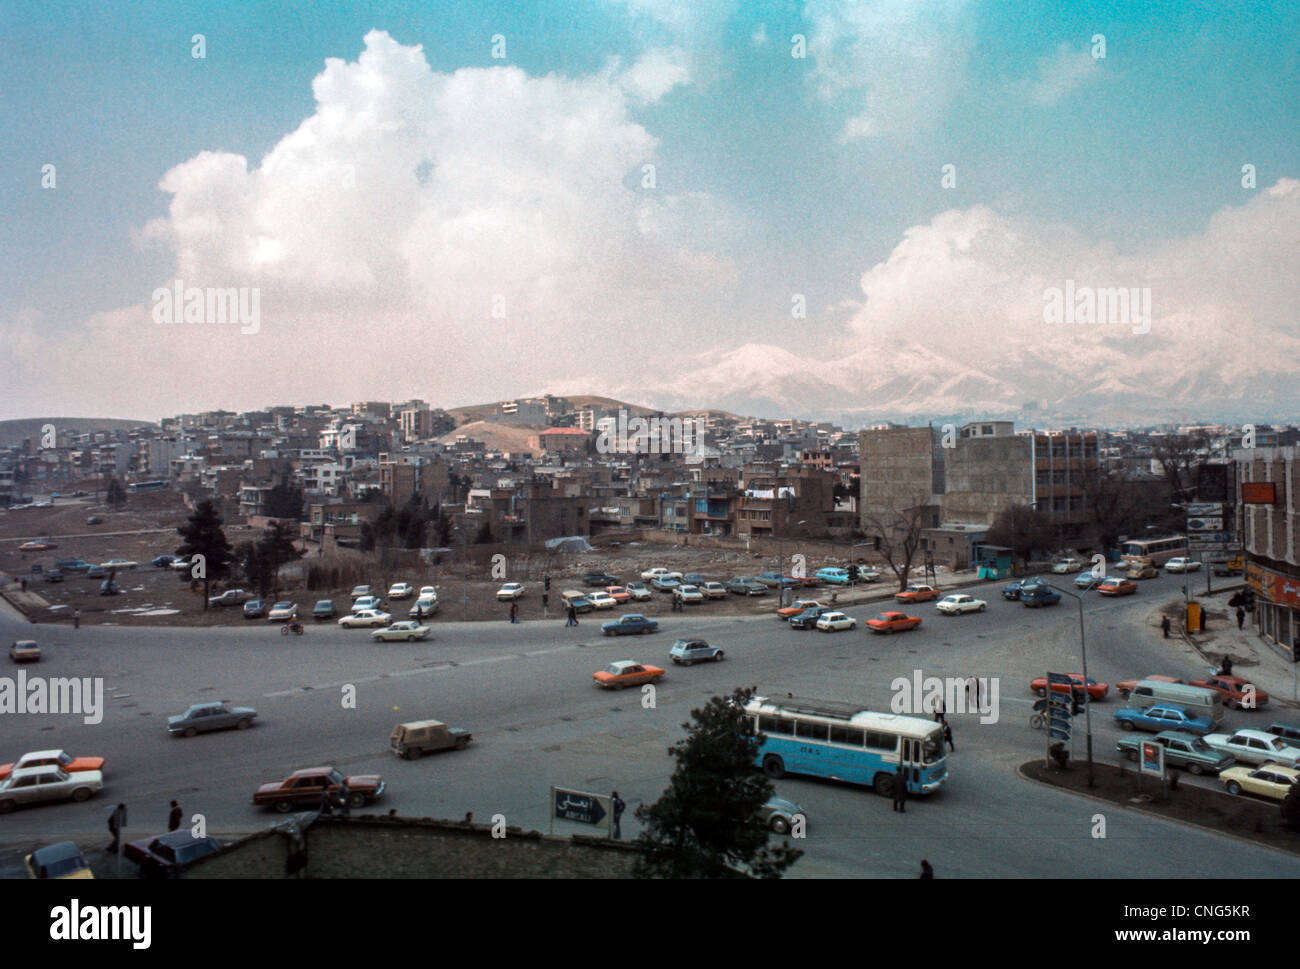 IRAN, TEHRAN: Busy intersection in Tehran, largest city and capital of Iran, with the Alborz Mountains. Archival photo, 1977 Stock Photo